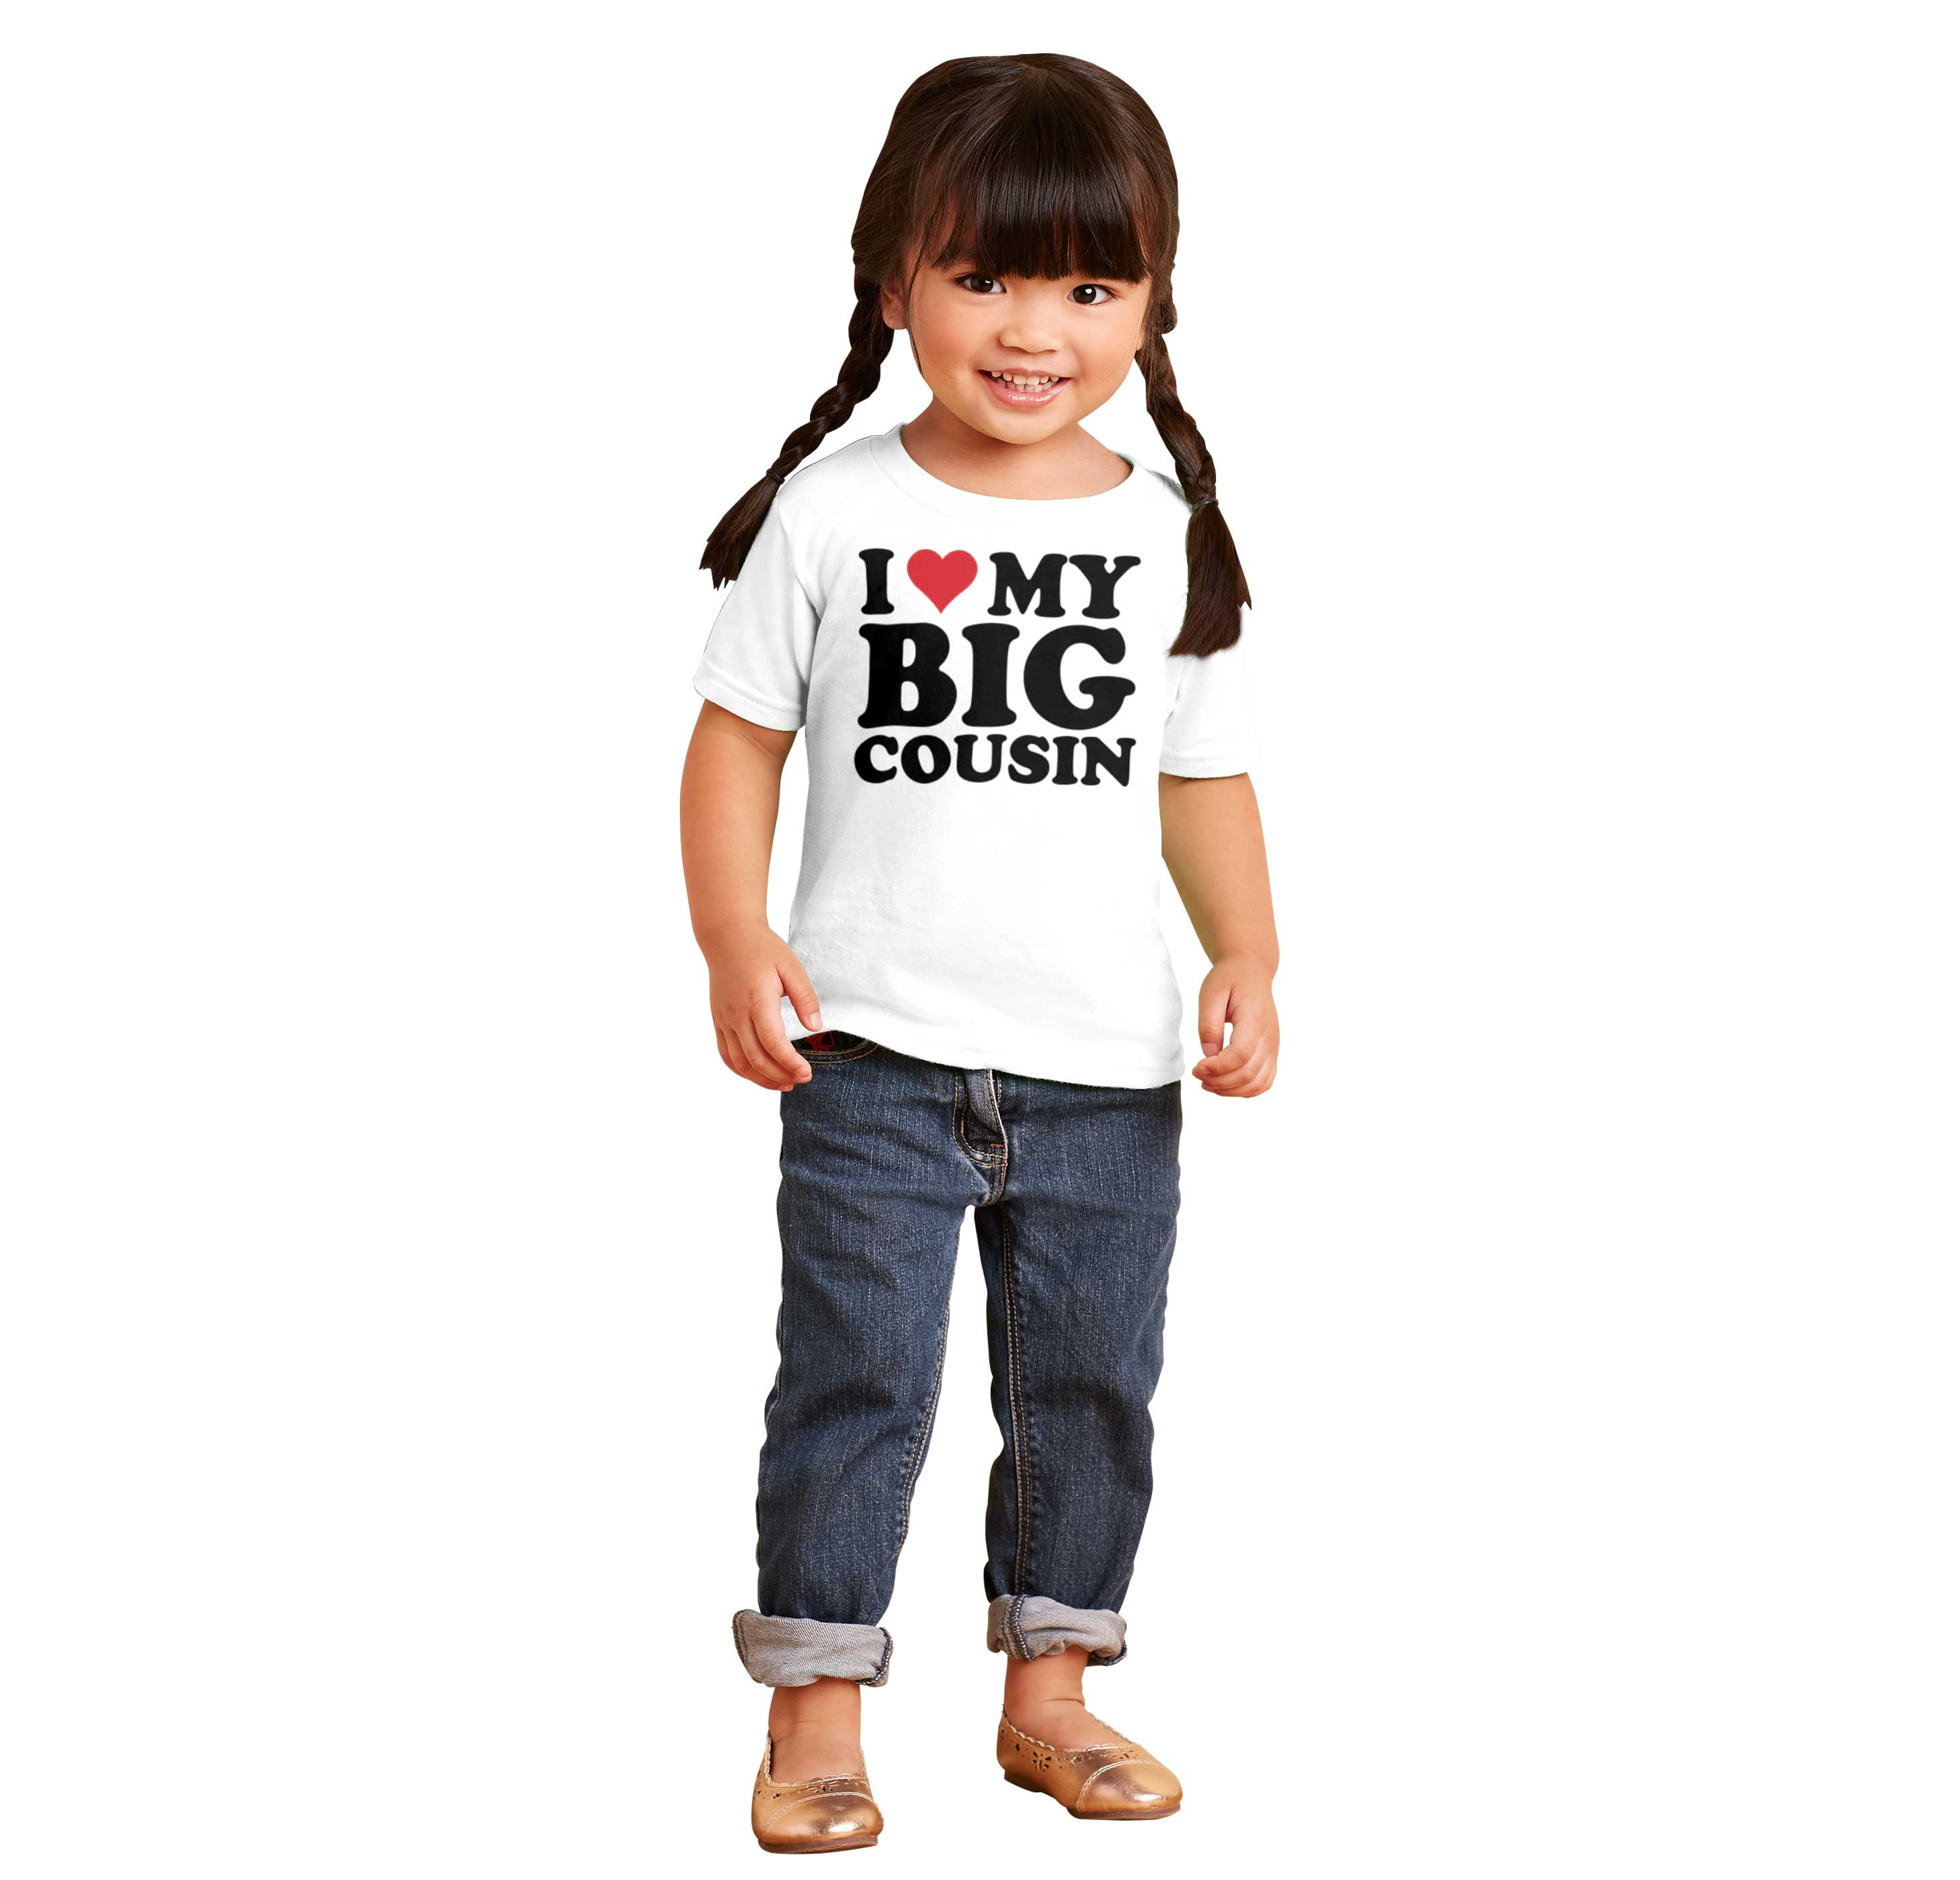 Brisco Cousin My Girl Toddler Boy Shirt Toddler Love I Brands T Cute Family 4T Big Infant